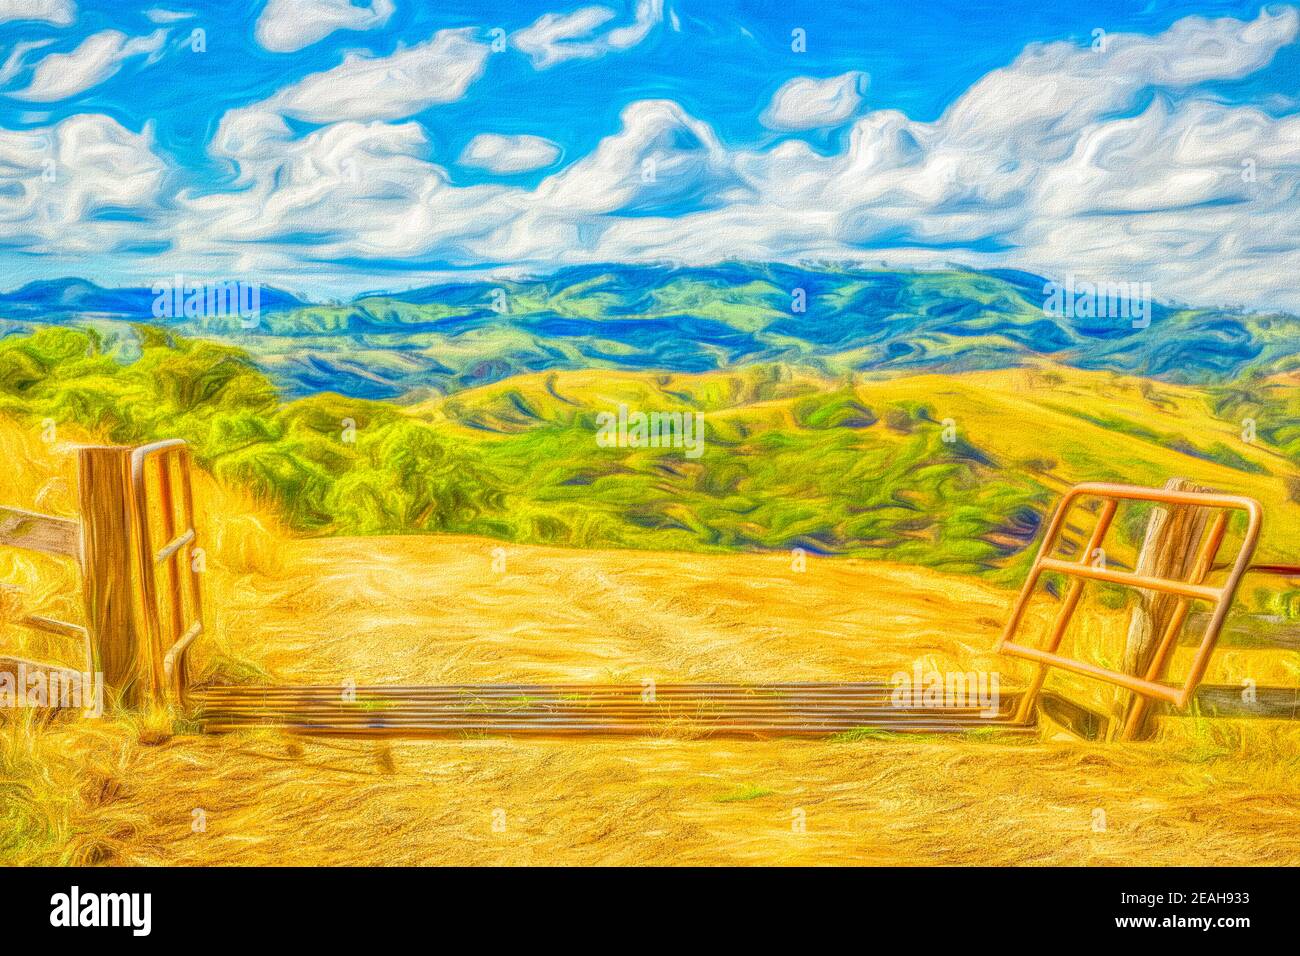 Digital painting of a cattle grid over a gravel road in rural NWS, Australia. Stock Photo